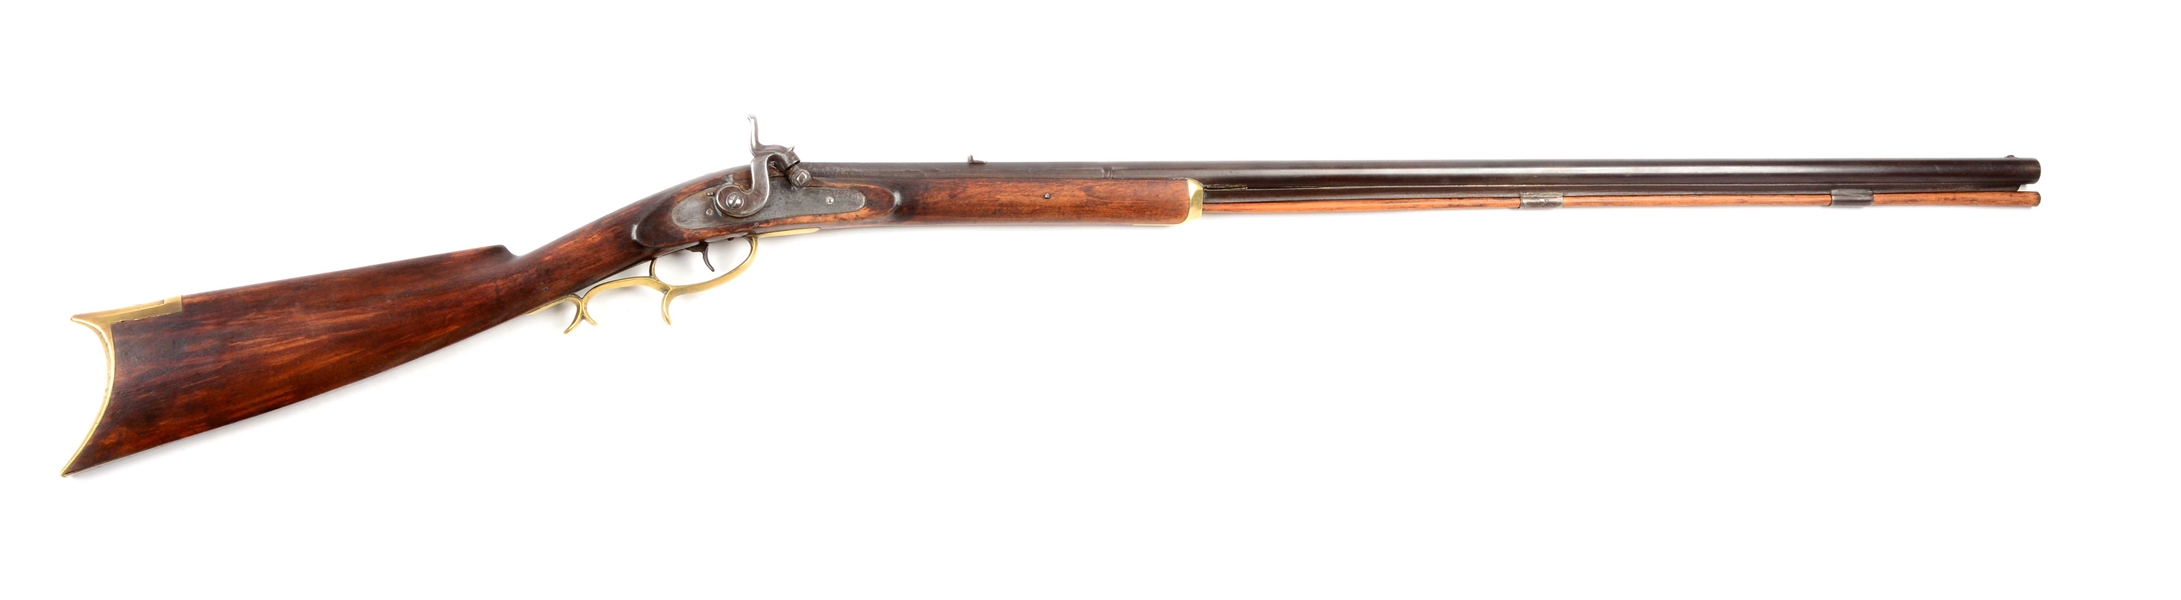 (A) A LADIES OR CHILDS HALF STOCK PERCUSSION RIFLE.